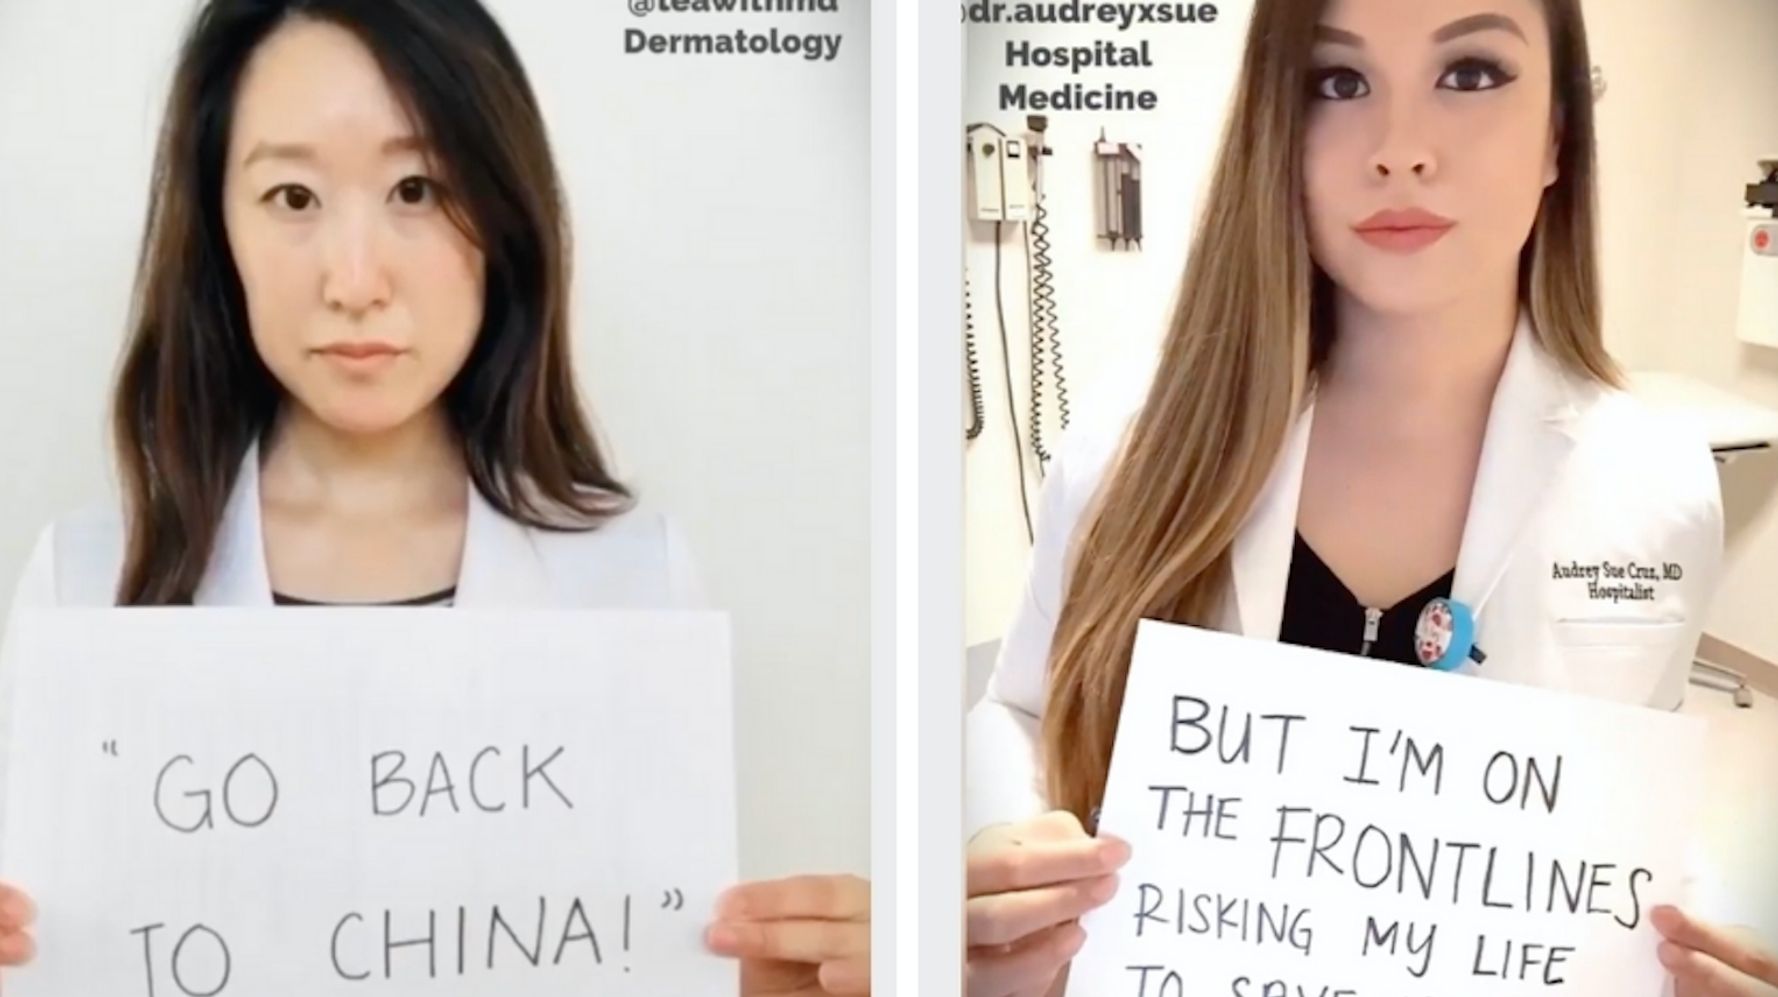 www.huffpost.com: Asian American Doctors Created A Video To Challenge COVID-19 Racism